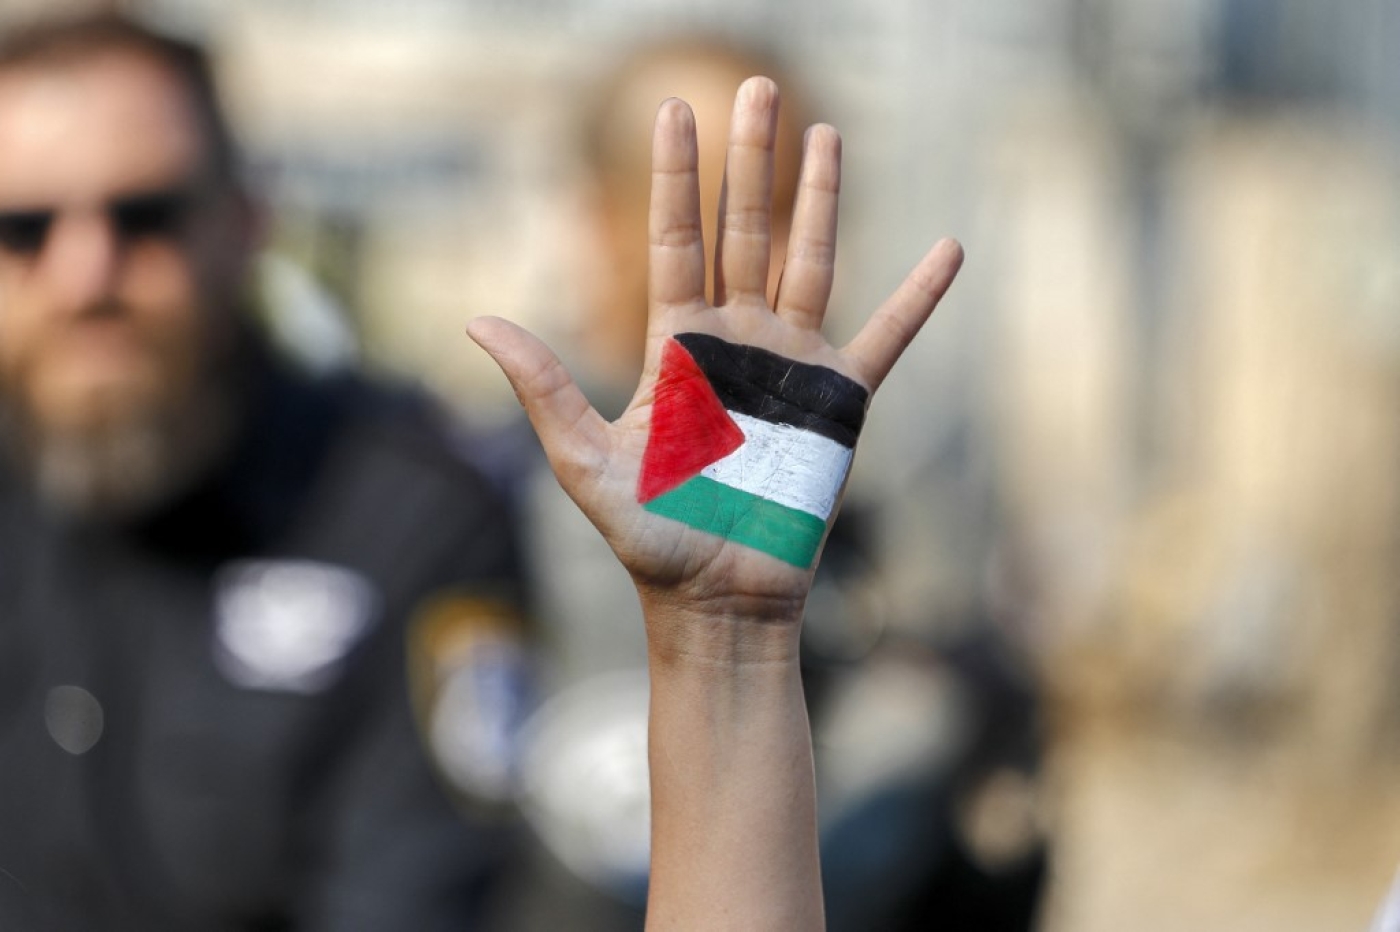 A demonstrator raises her hand, painted with the colours of the Palestinian flag, during a protest in Jerusalem on 30 July 2021 (AFP)